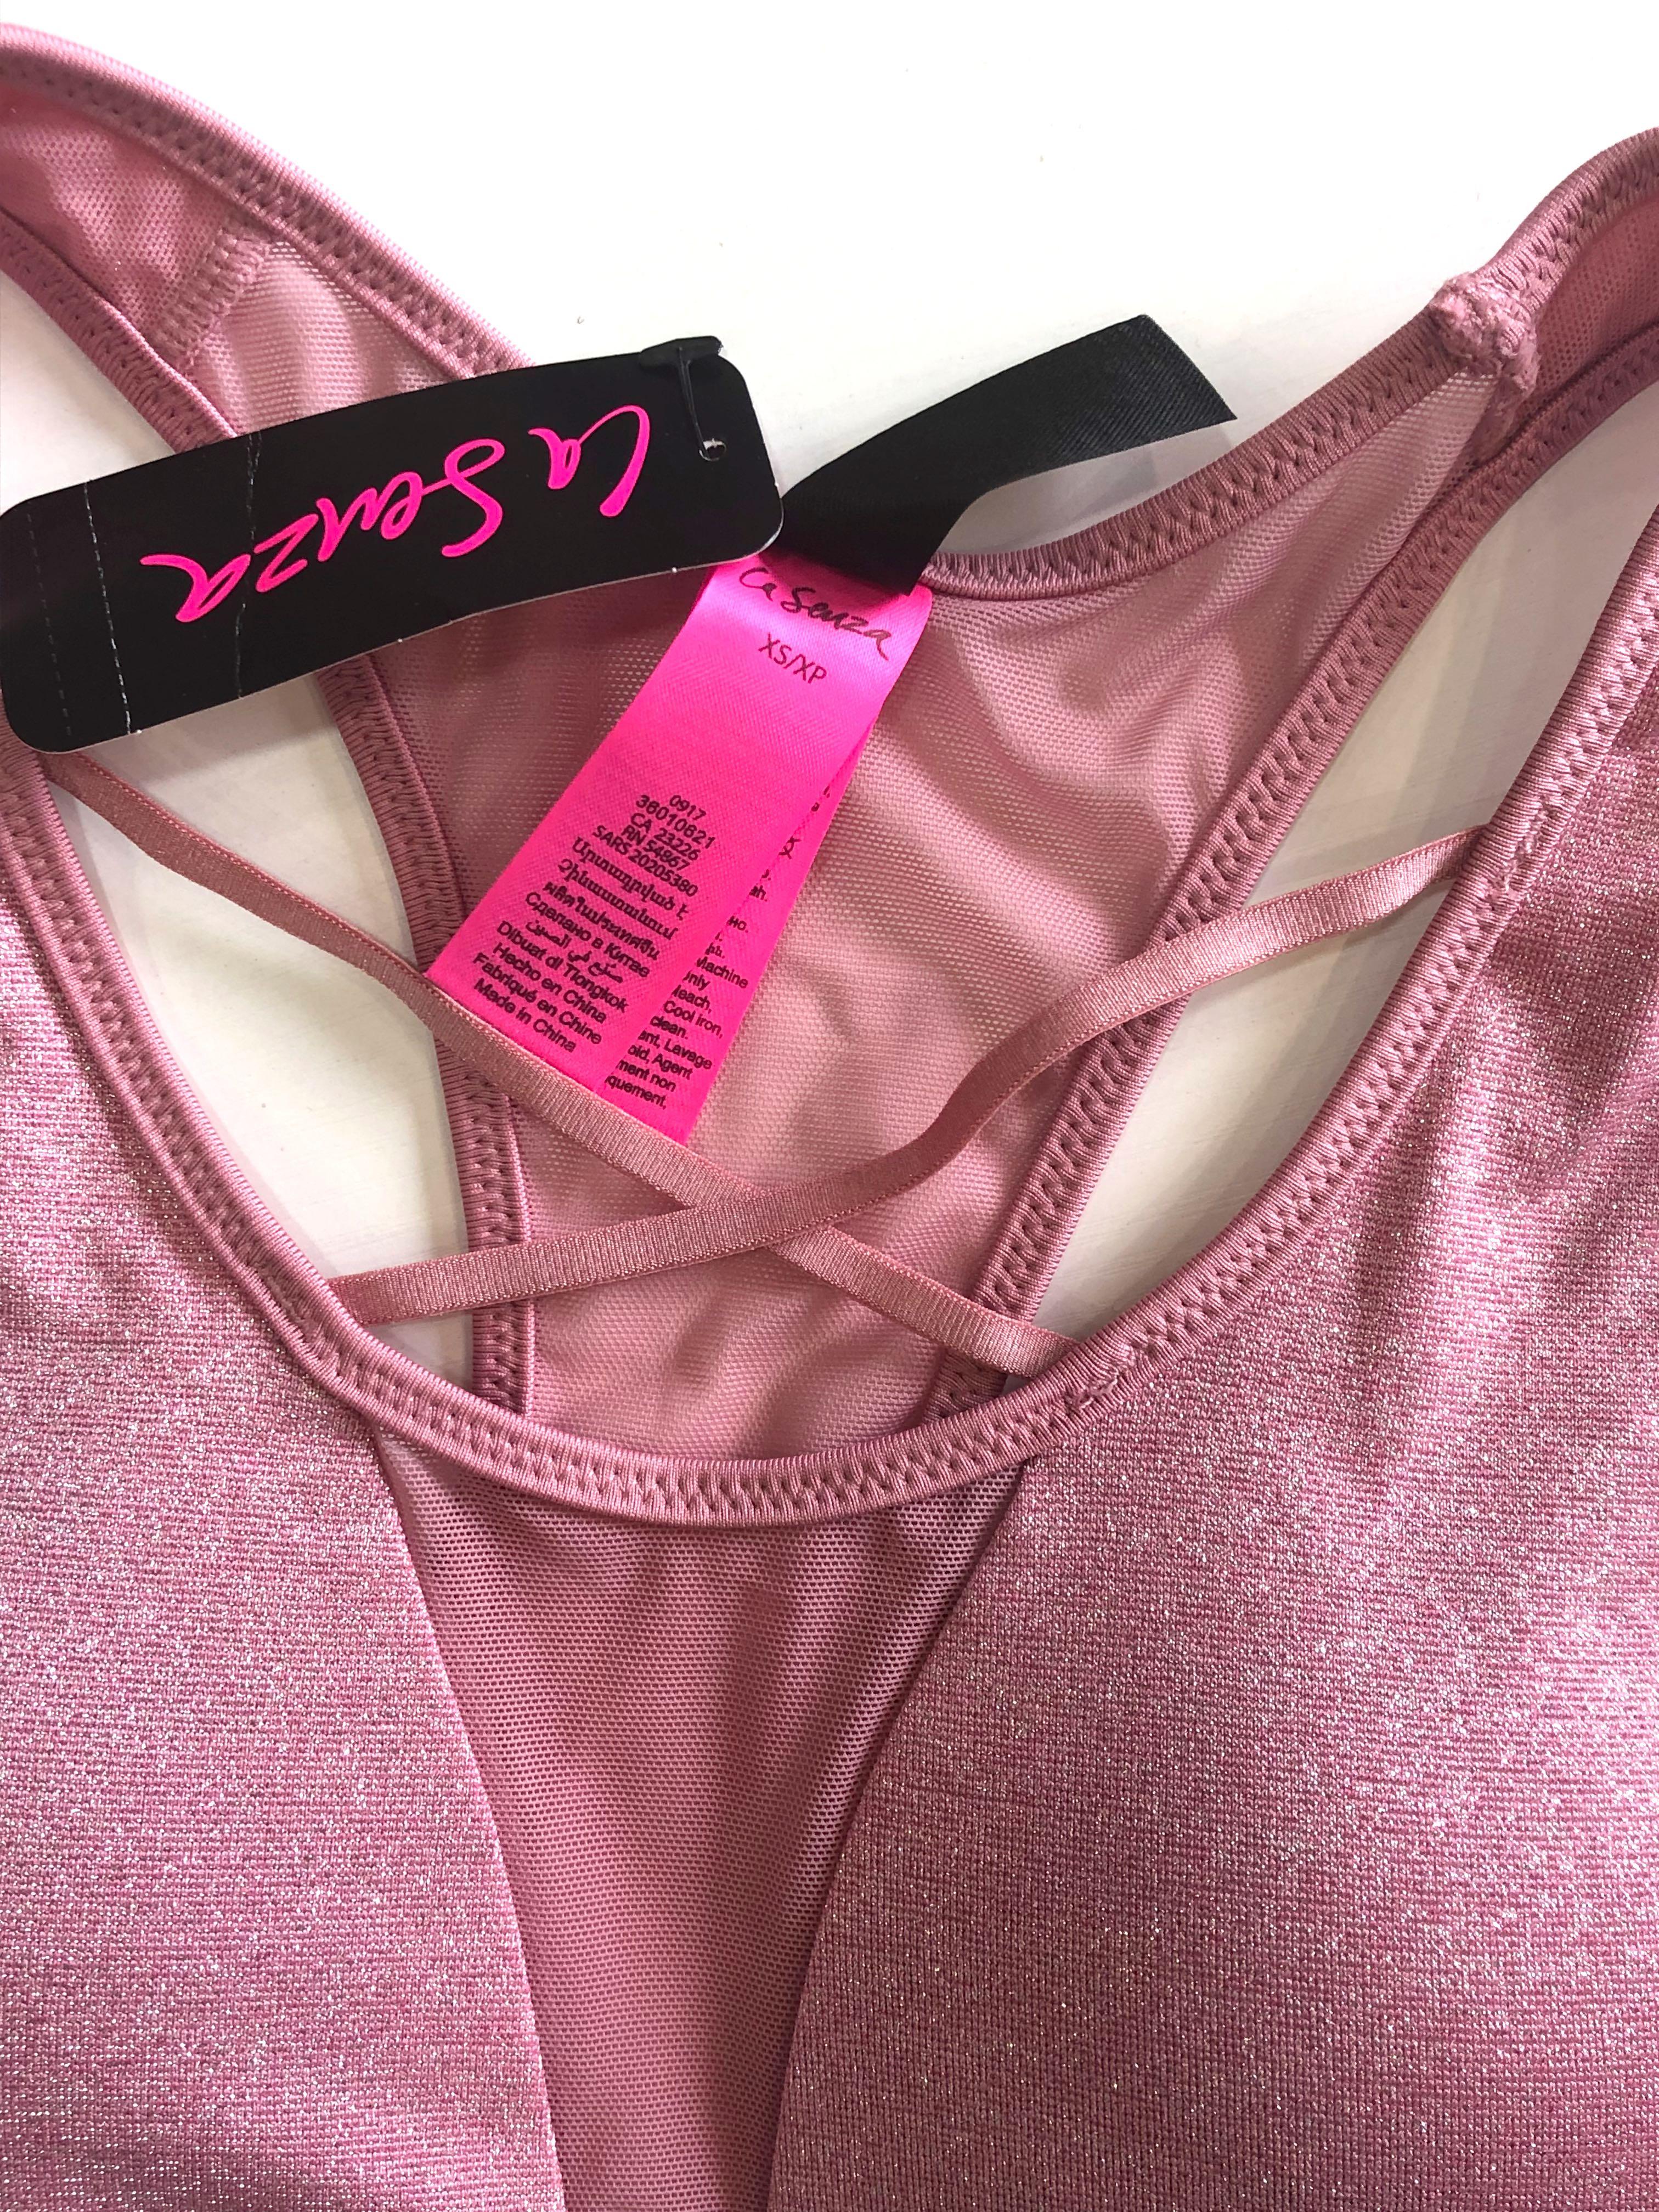 La Senza Sparkling Pink Strappy Racerback Sports Bra - Pink XS Extra Small,  Women's Fashion, Activewear on Carousell